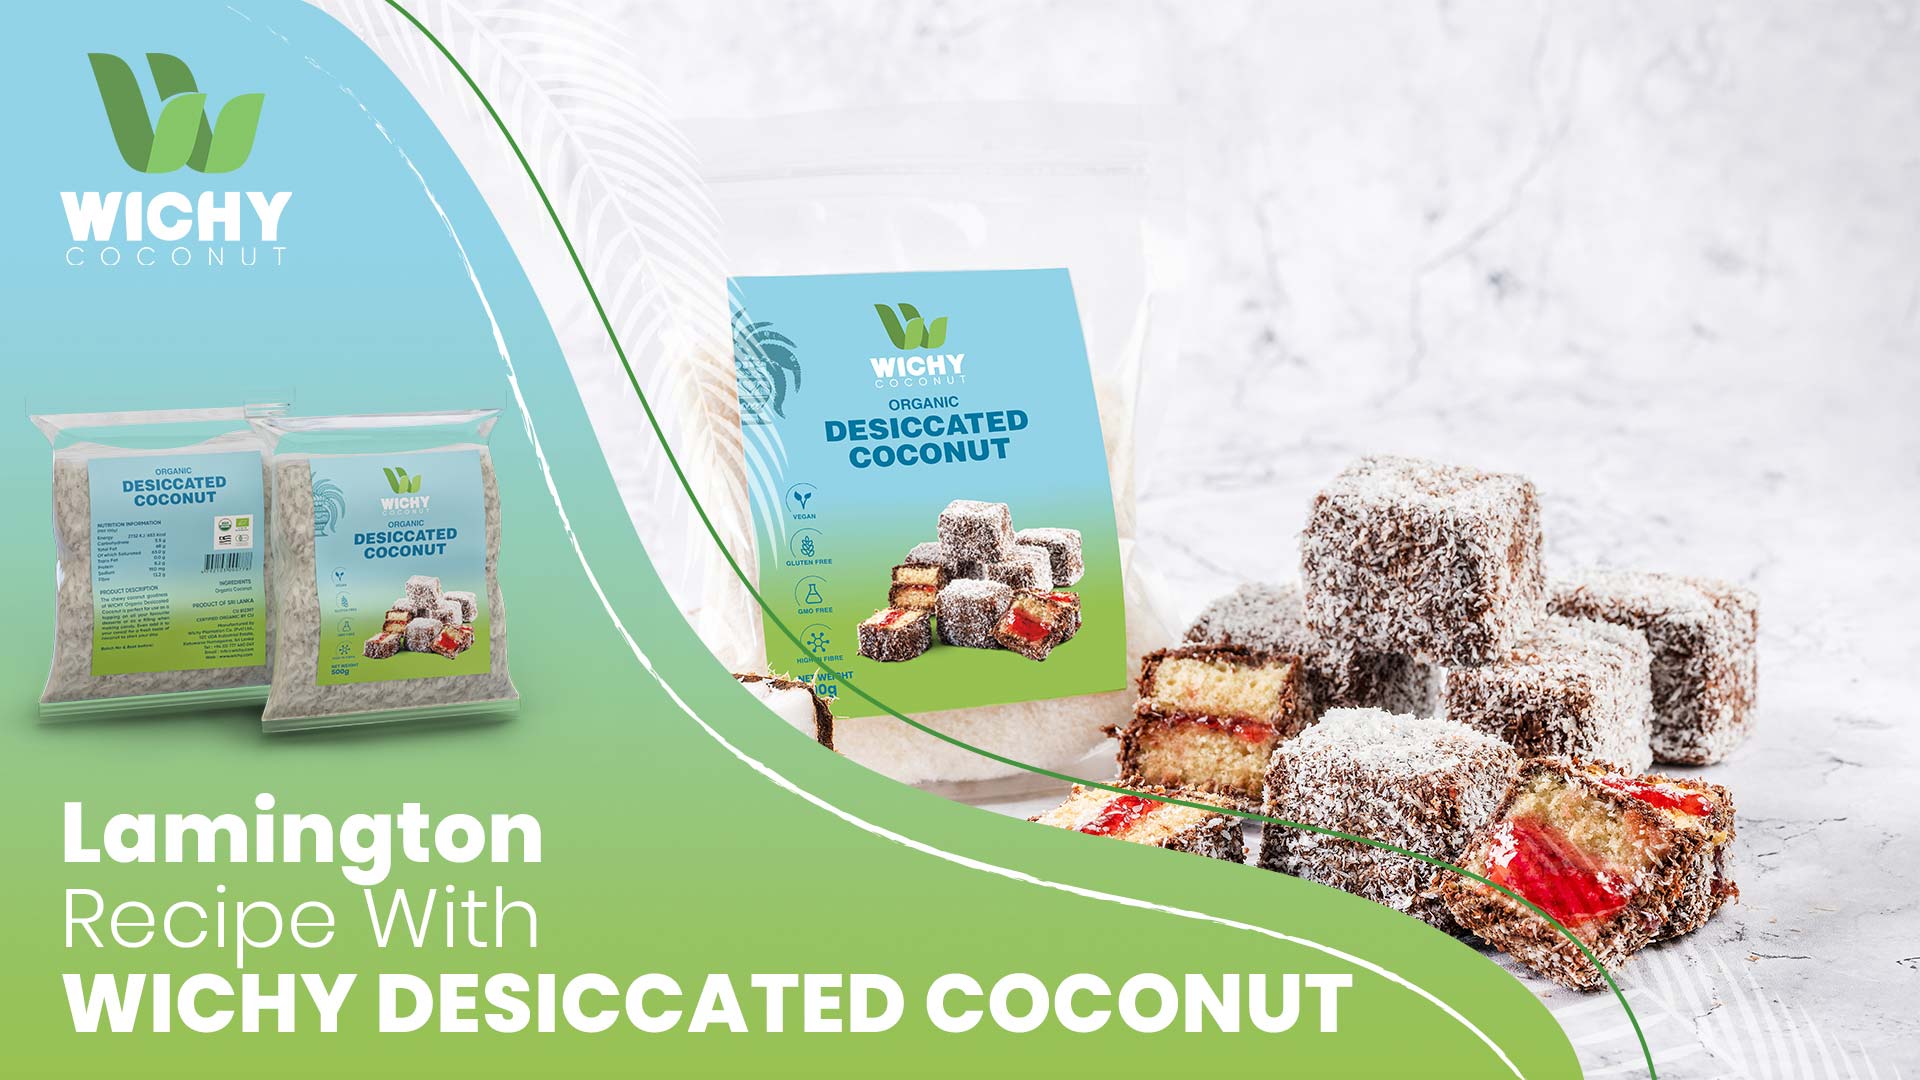 Lamington Recipe with WICHY Organic Desiccated Coconut